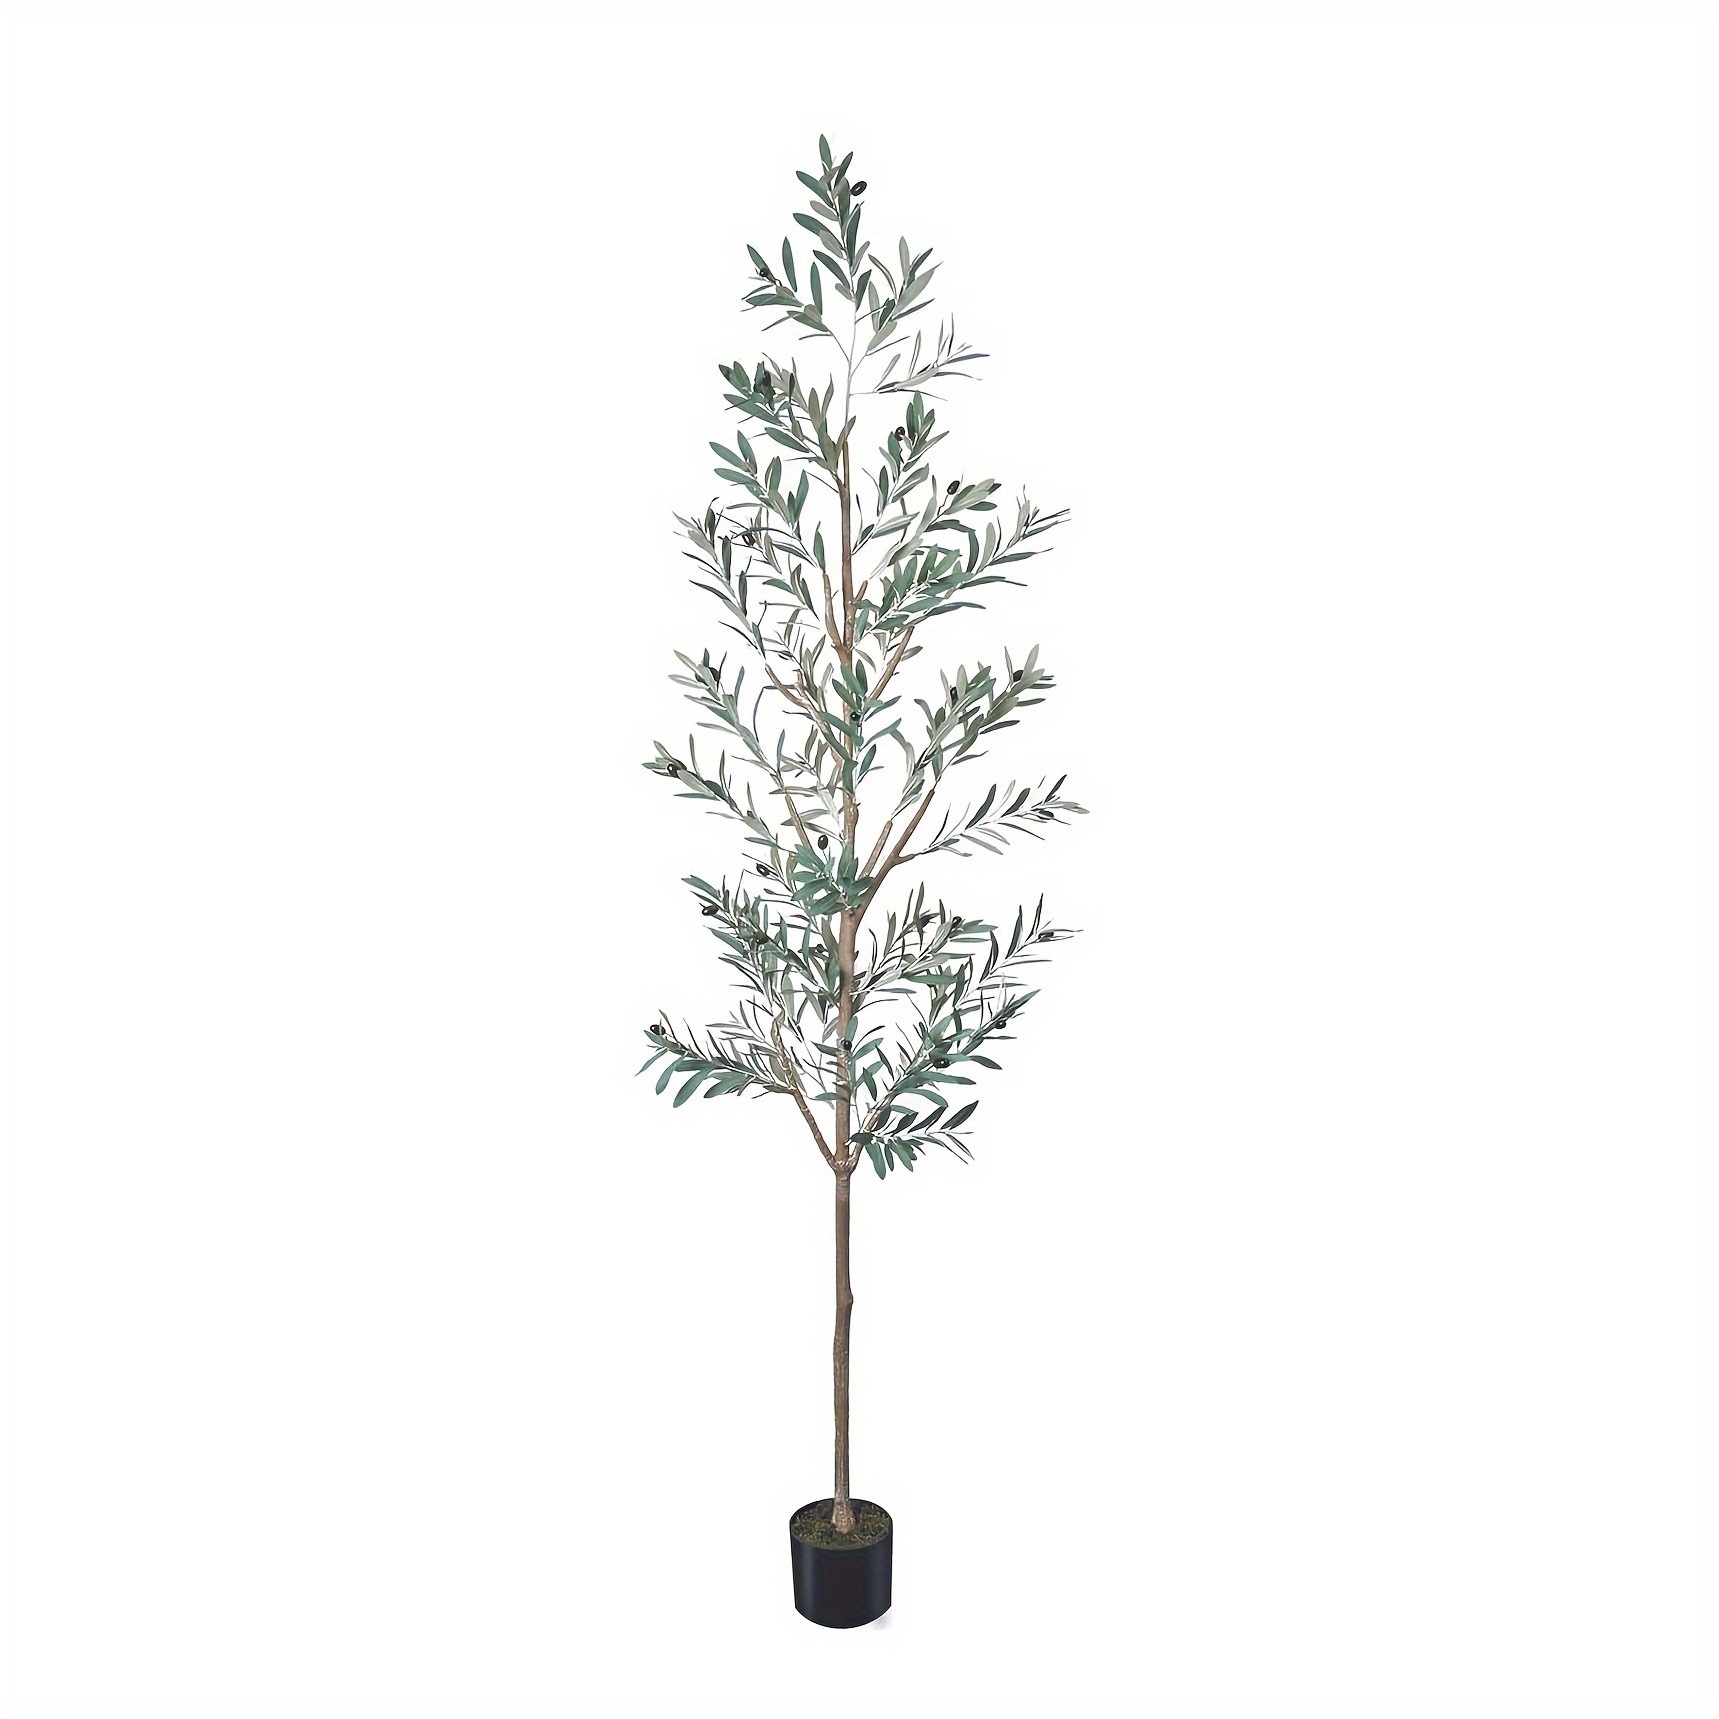 Maia Shop Olive, Artificial Tree with Natural Trunks, Made with The Best  Materials, Ideal for Home Decoration, Artificial Plant 3.5 feet Tall - 41